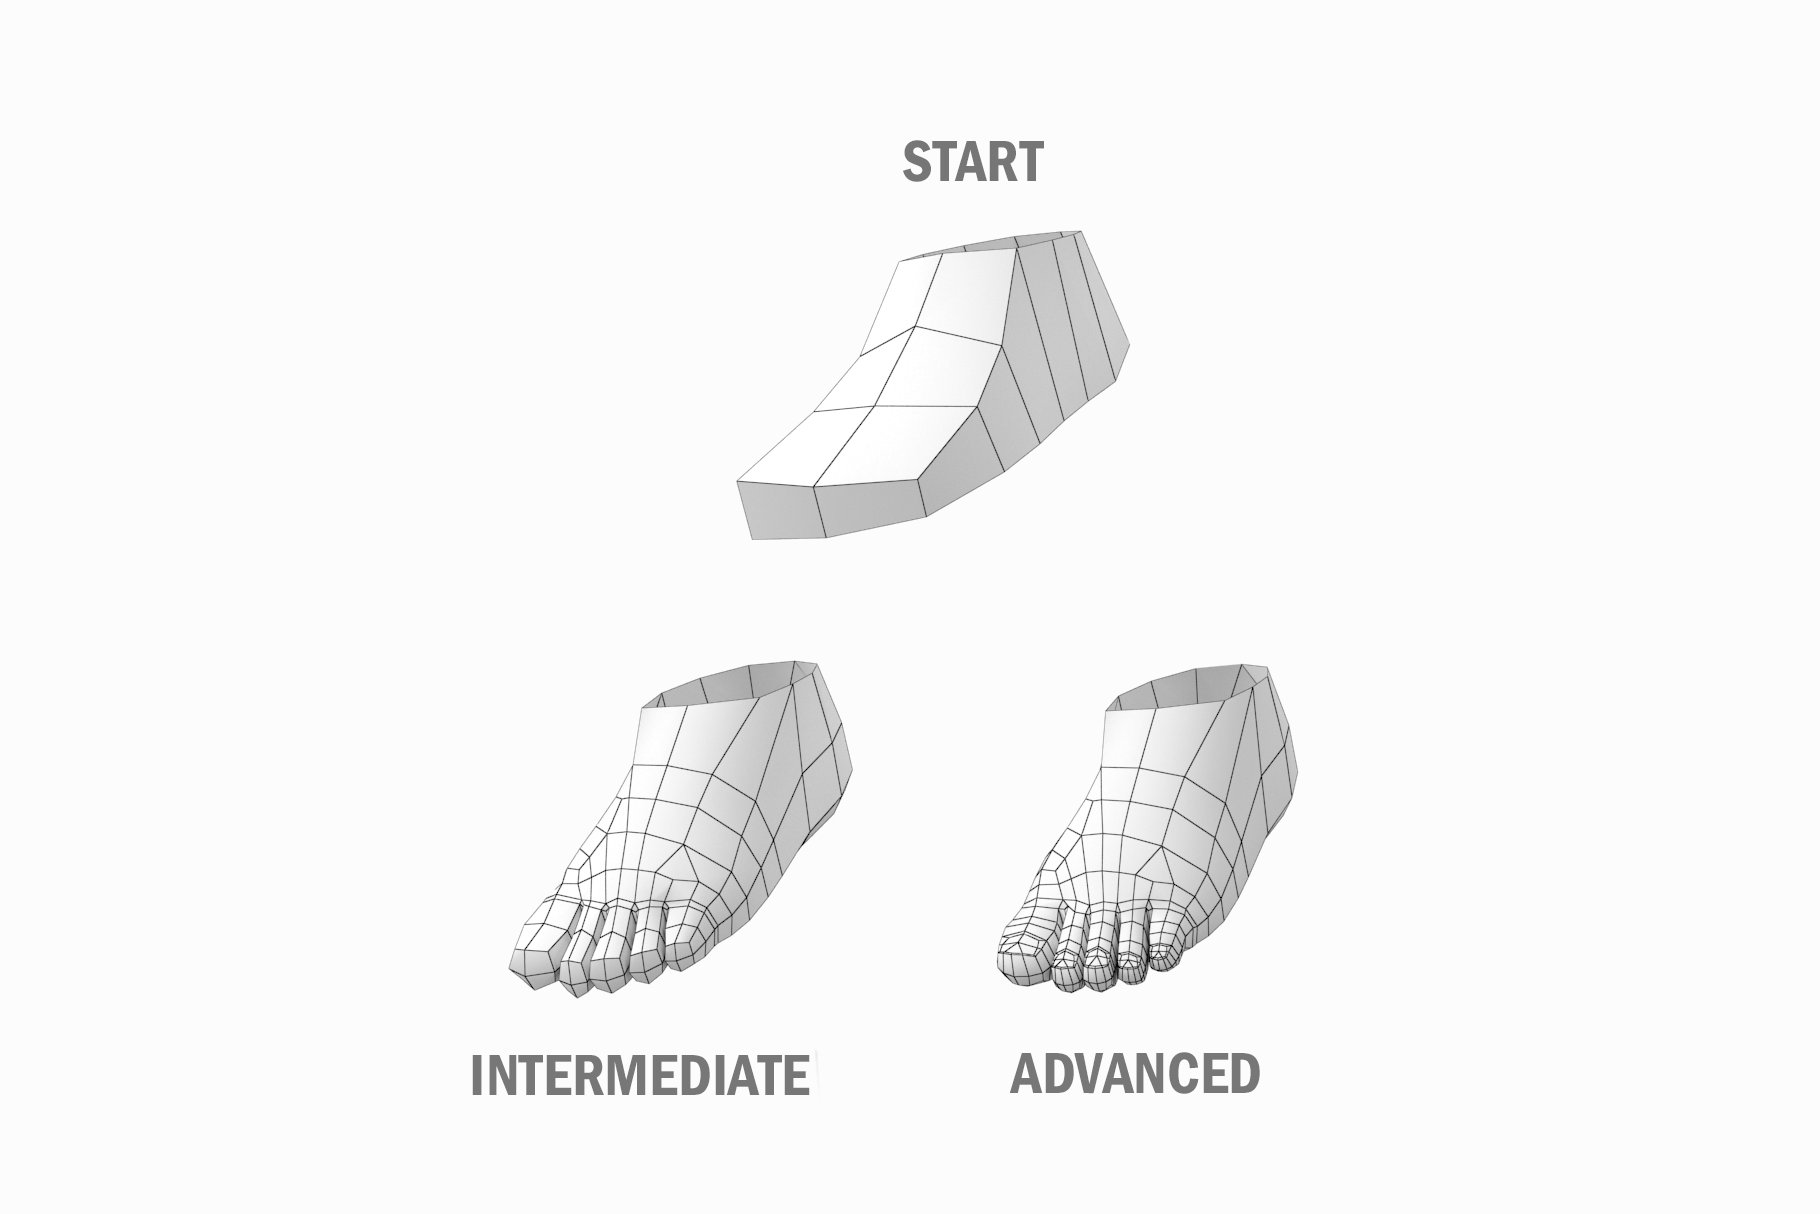 Irresistible low poly 3d rendering of a male foot without textures